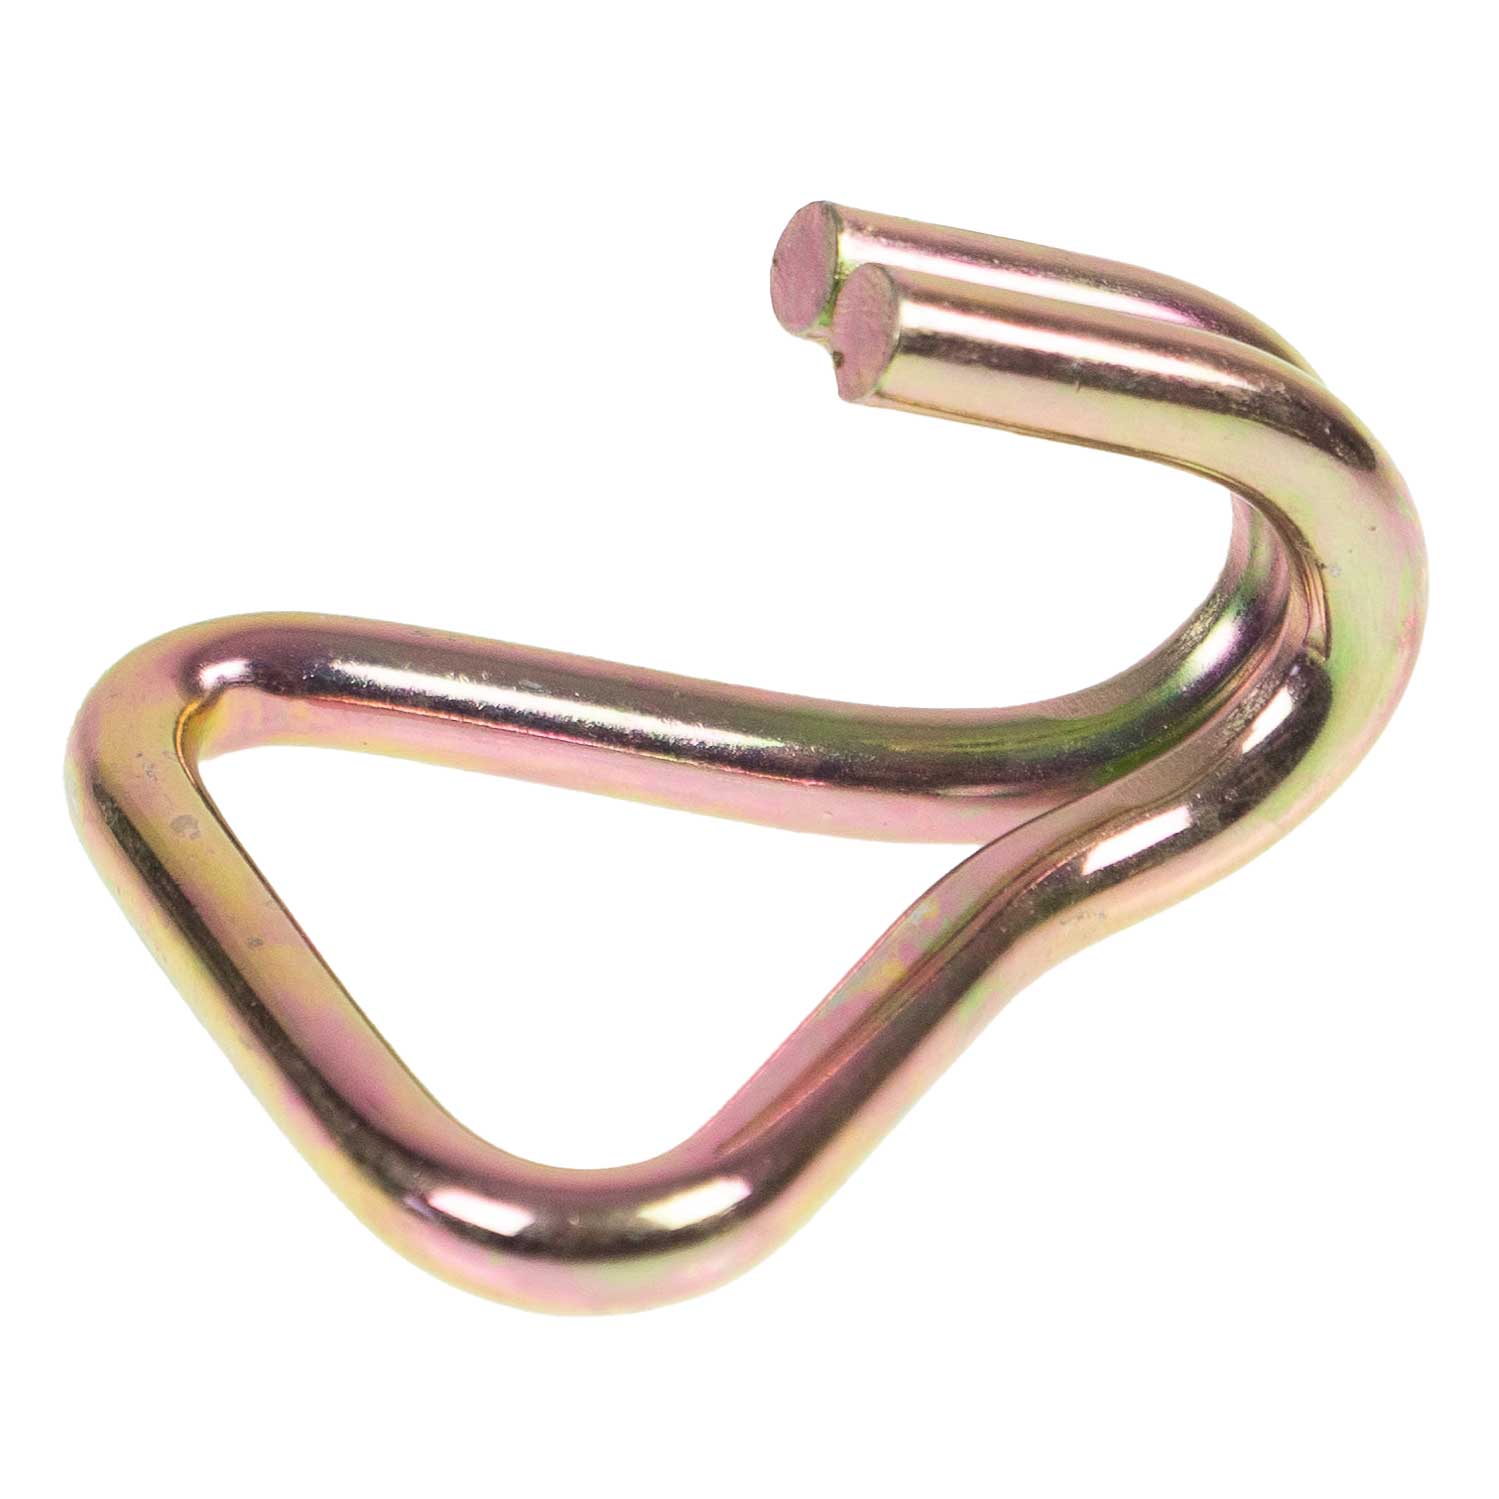 WH505 - 2 Double J Wire Hook